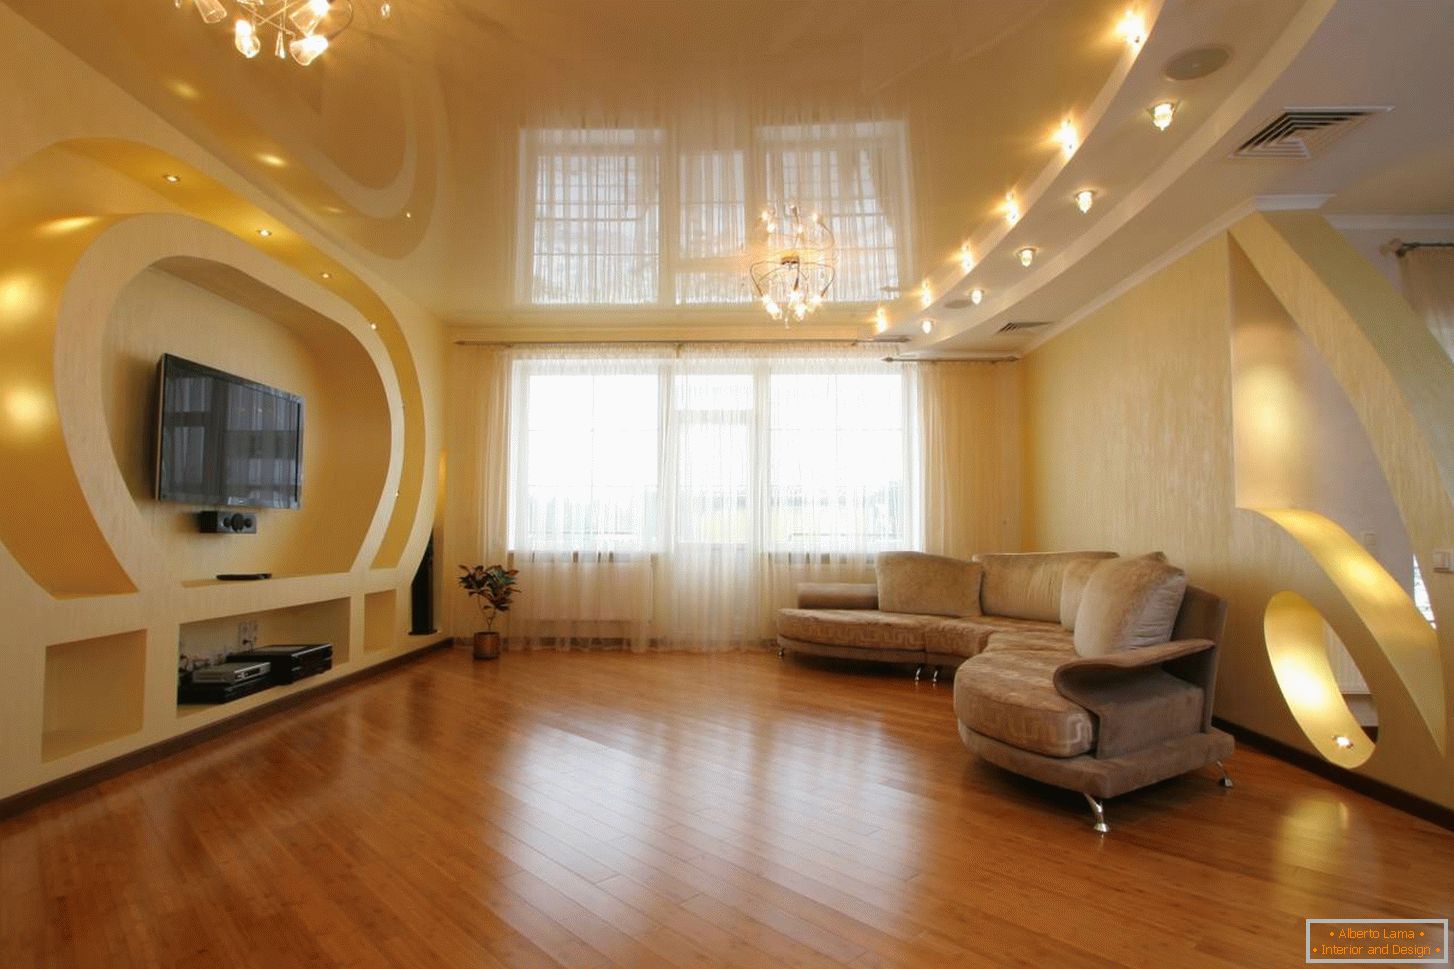 The gentle peach ceiling in the color of the general interior decoration is equipped with lighting, divided into zones. LED lights above the sofa and two chandeliers on either side of the room.